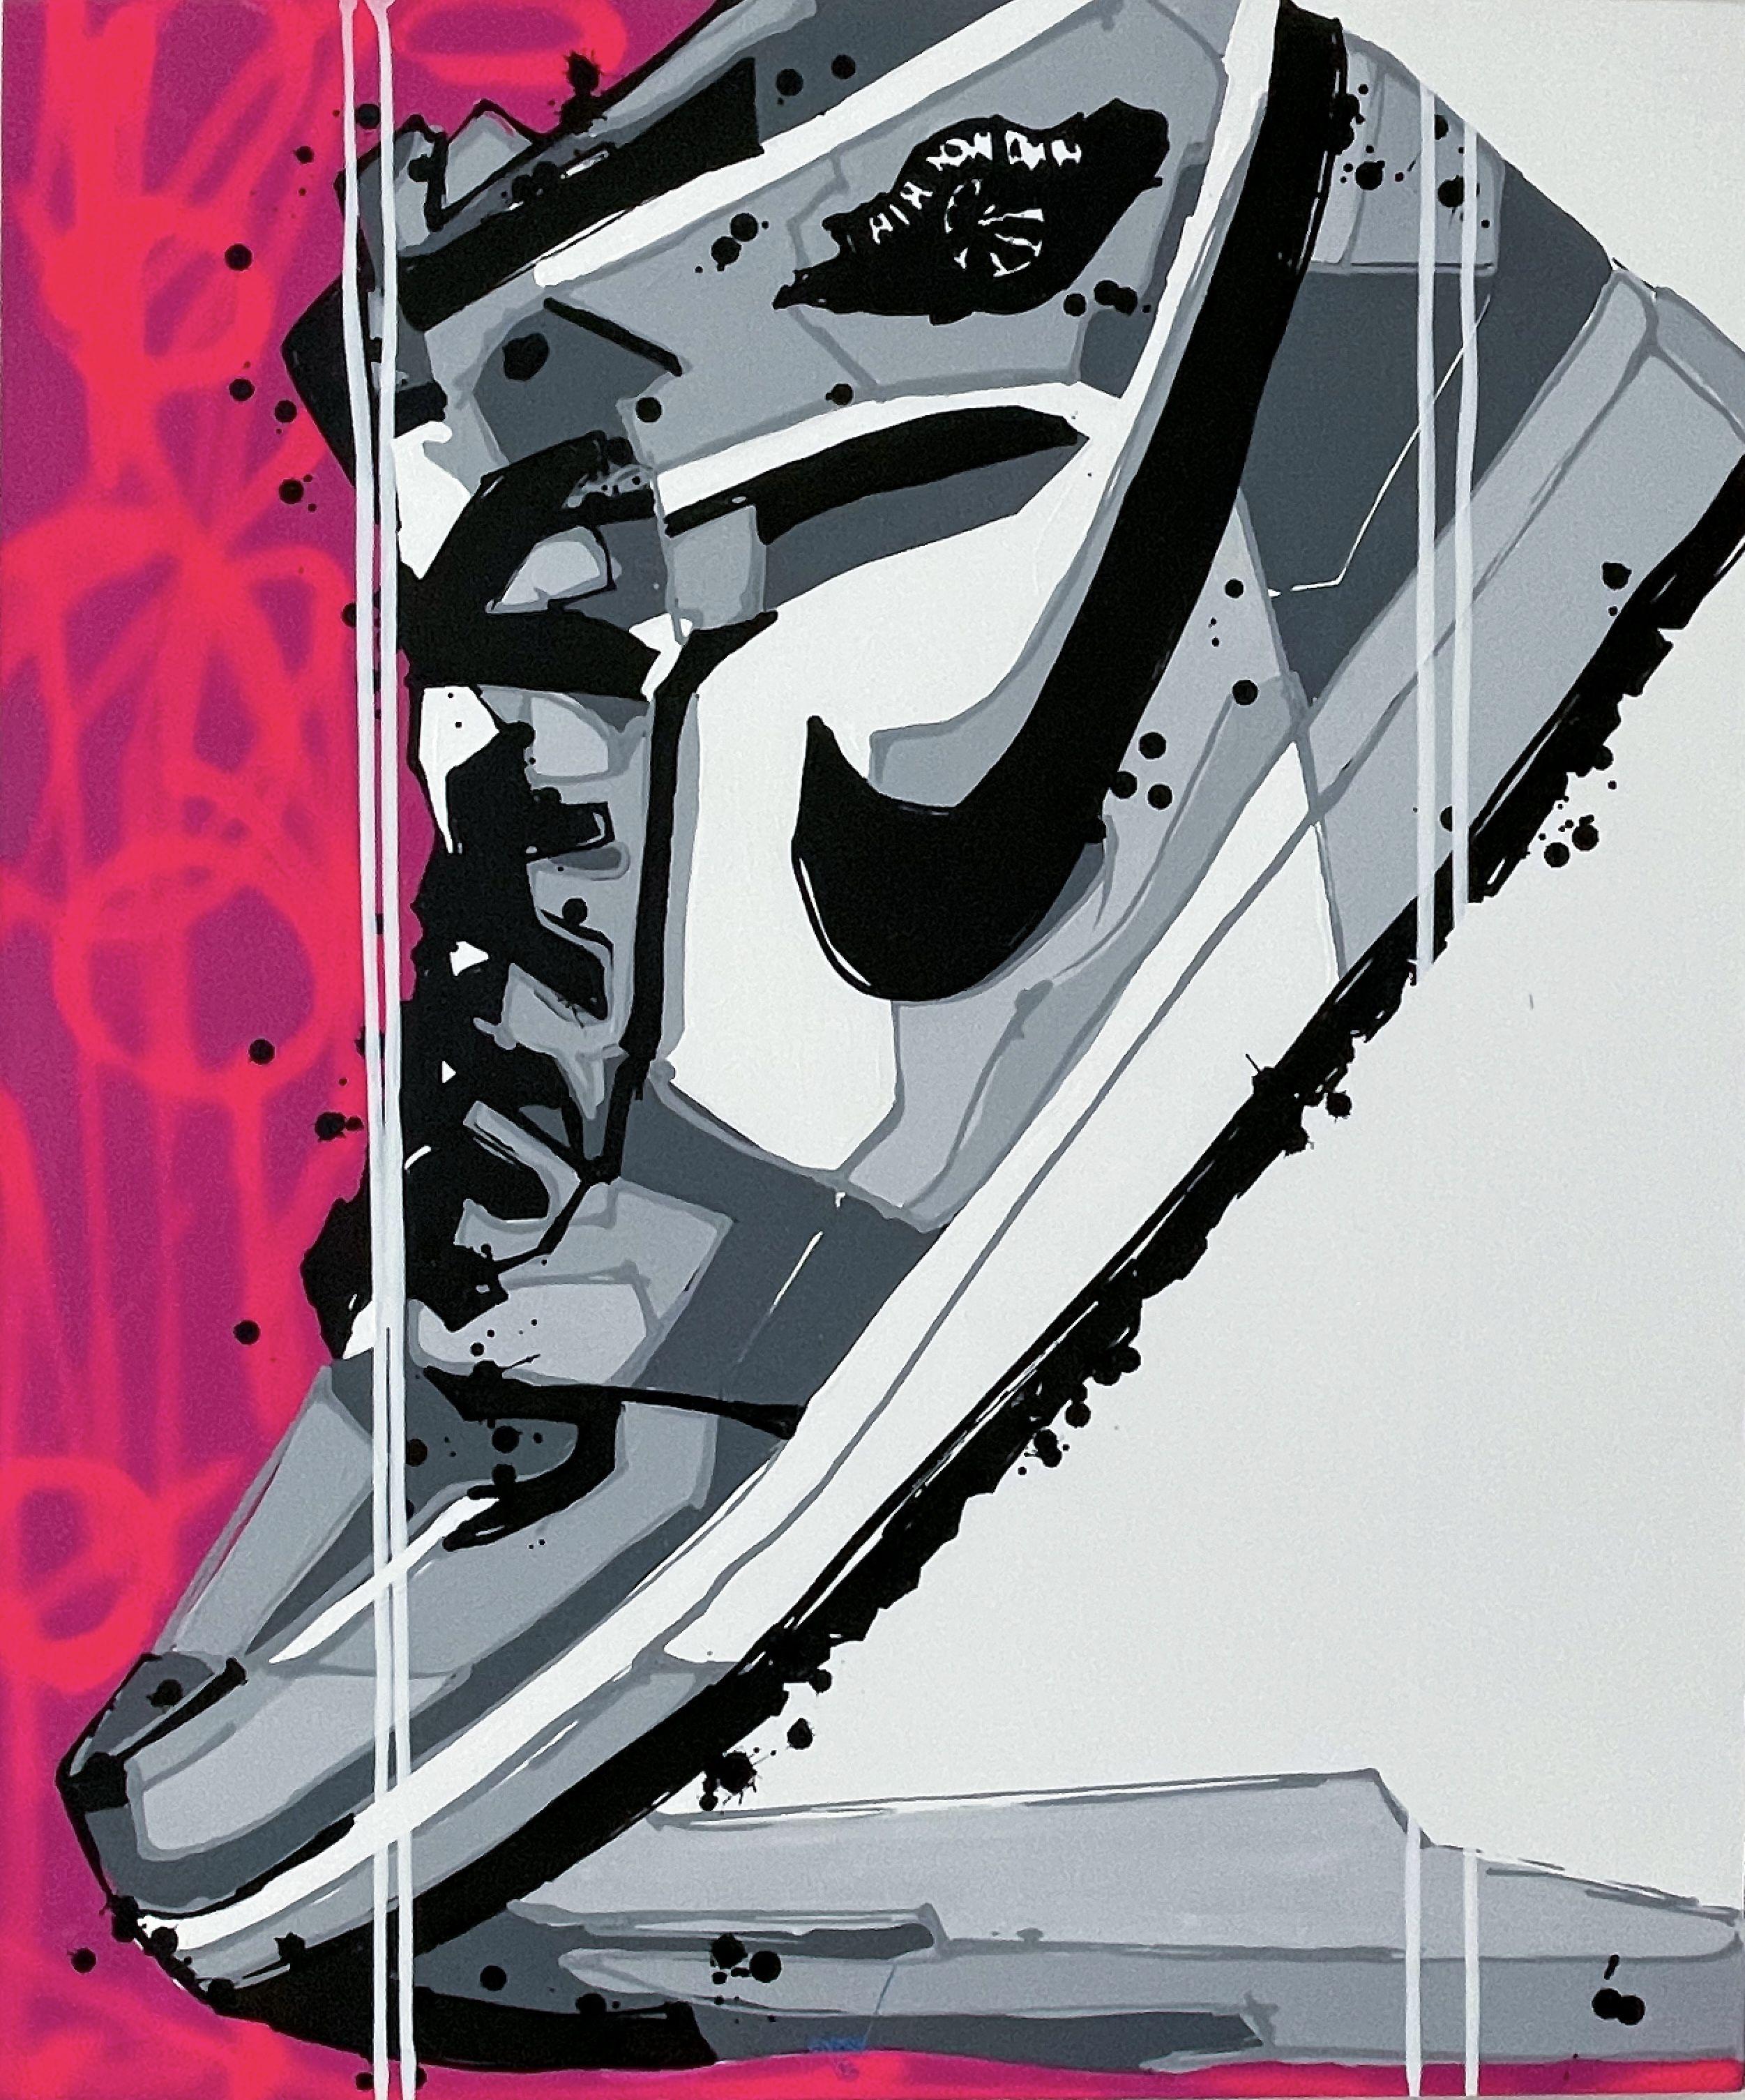 The artworks in this Limited Edition Series are visually striking and capture the iconic design of the Air Jordan 1 shoes in a bold and energetic way. The use of acrylic and spray paint adds depth and texture to the pieces, creating a sense of